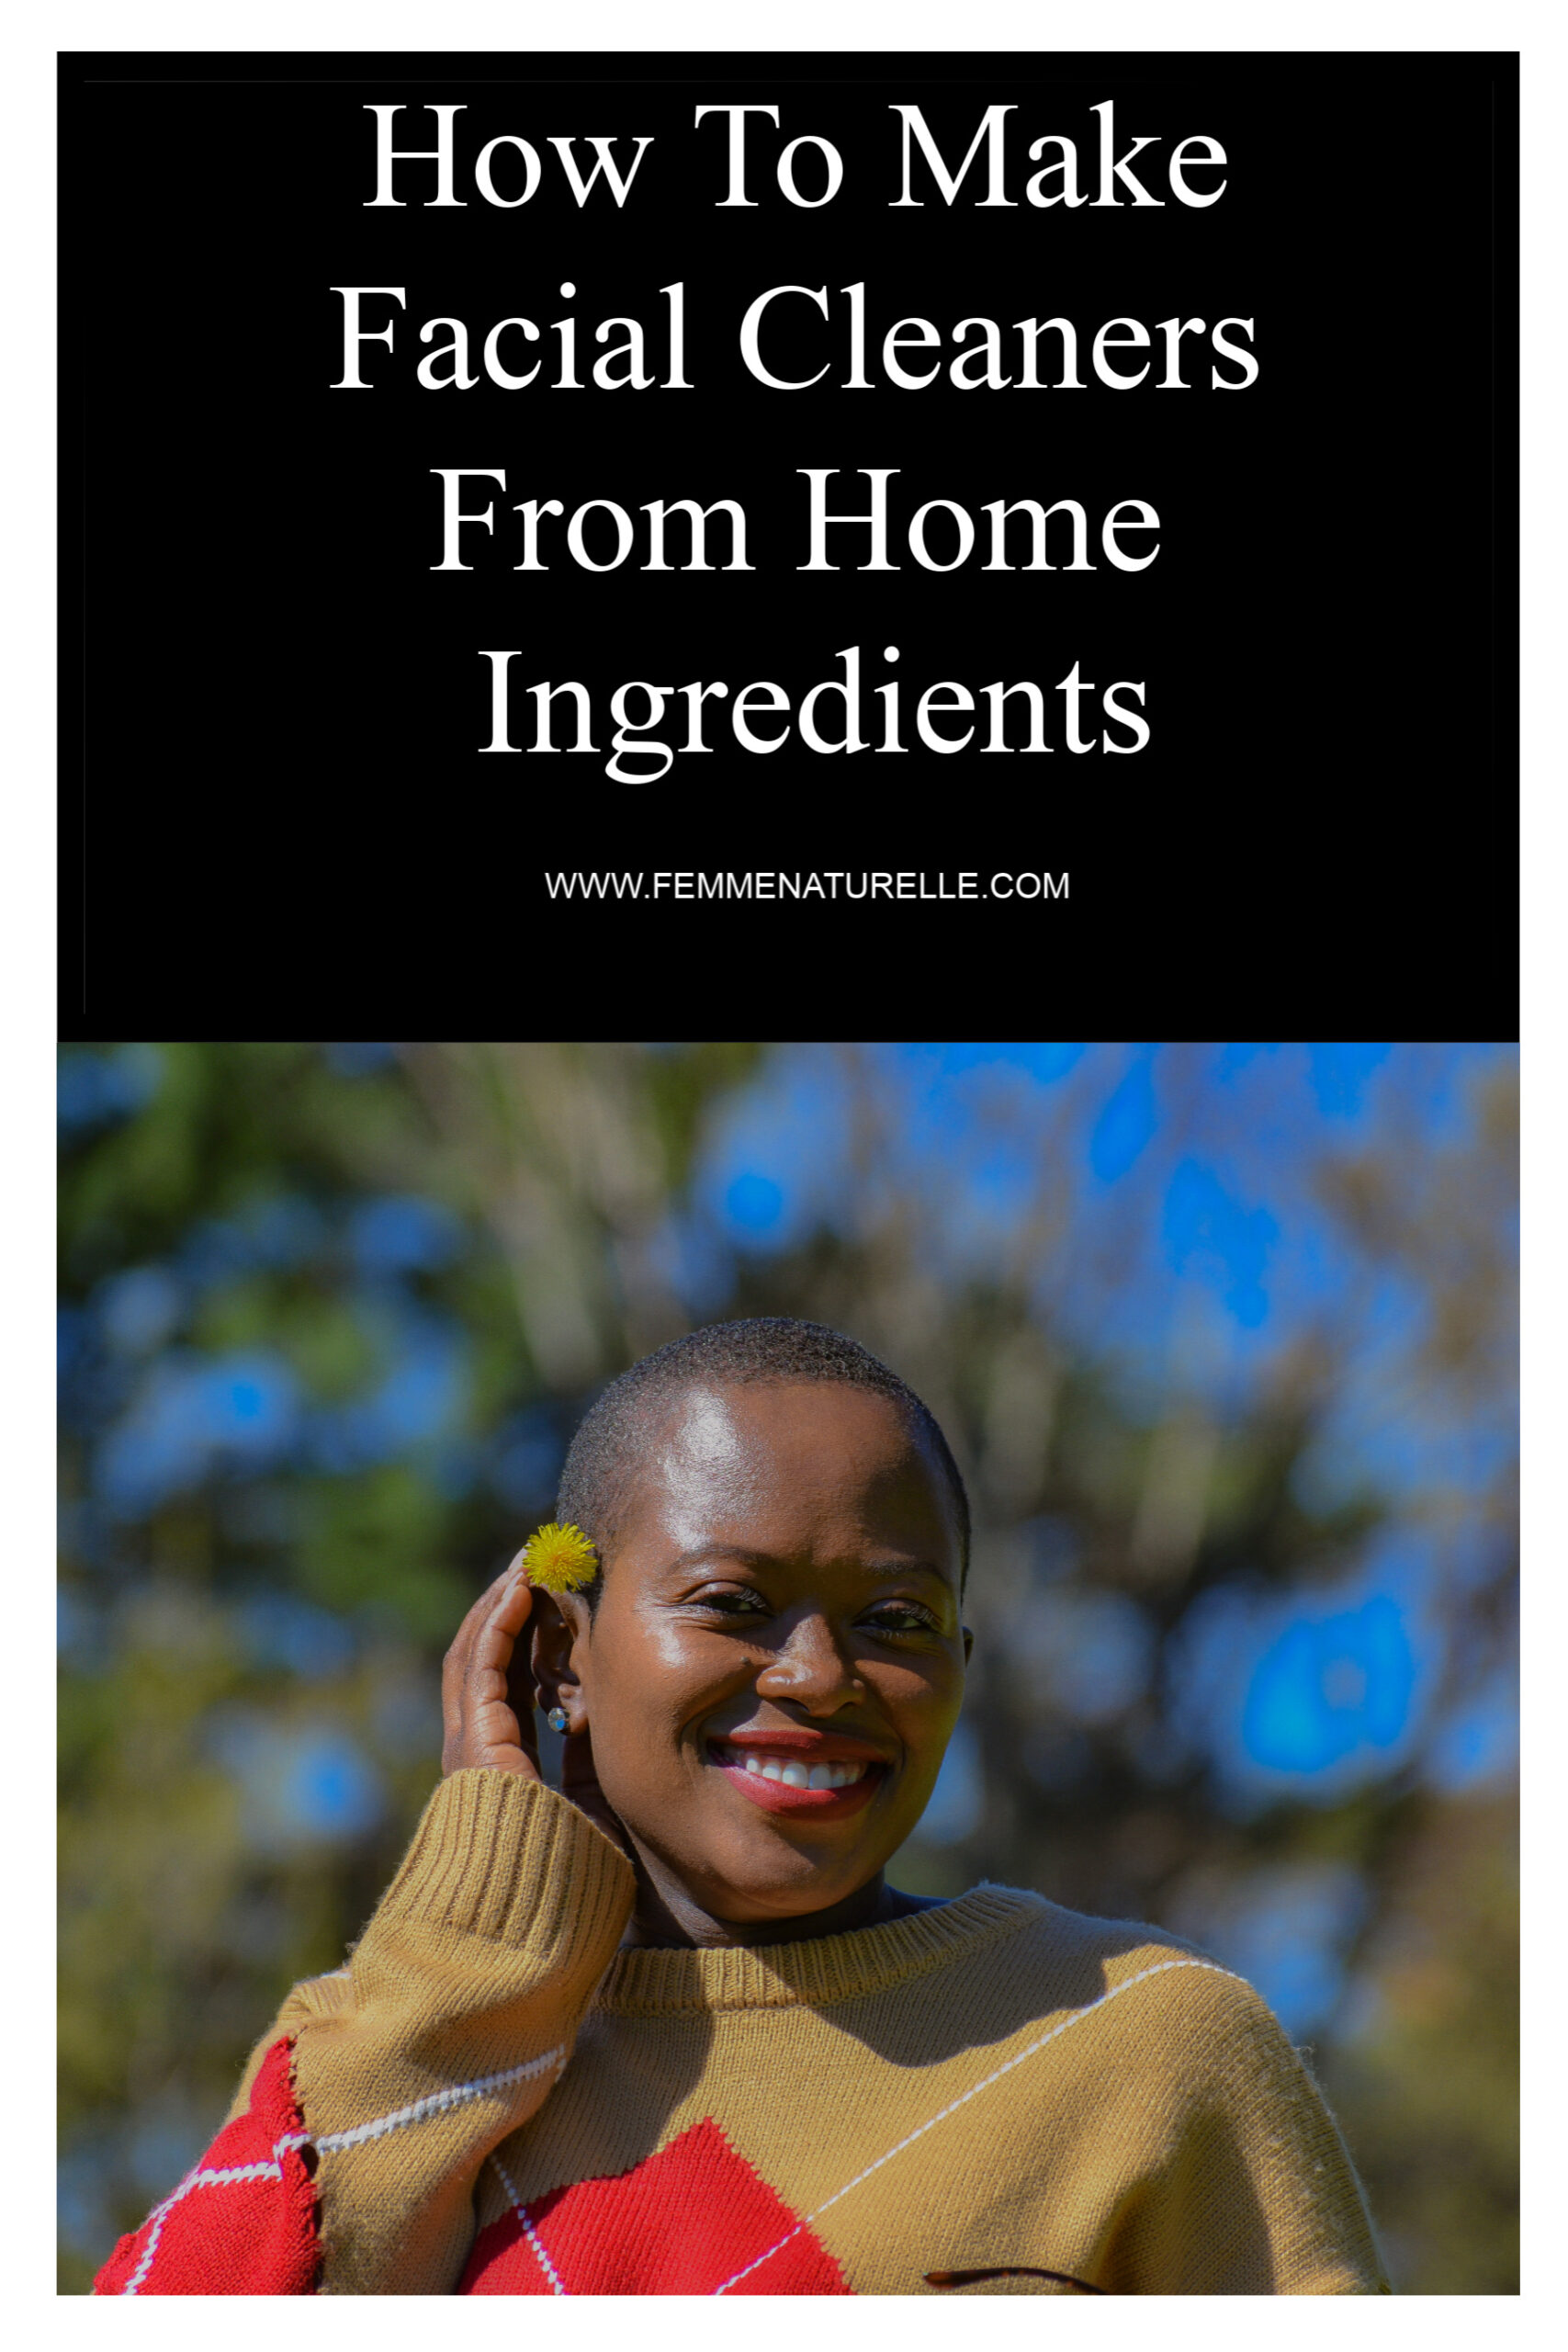 How To Make Facial Cleaners From Home Ingredients